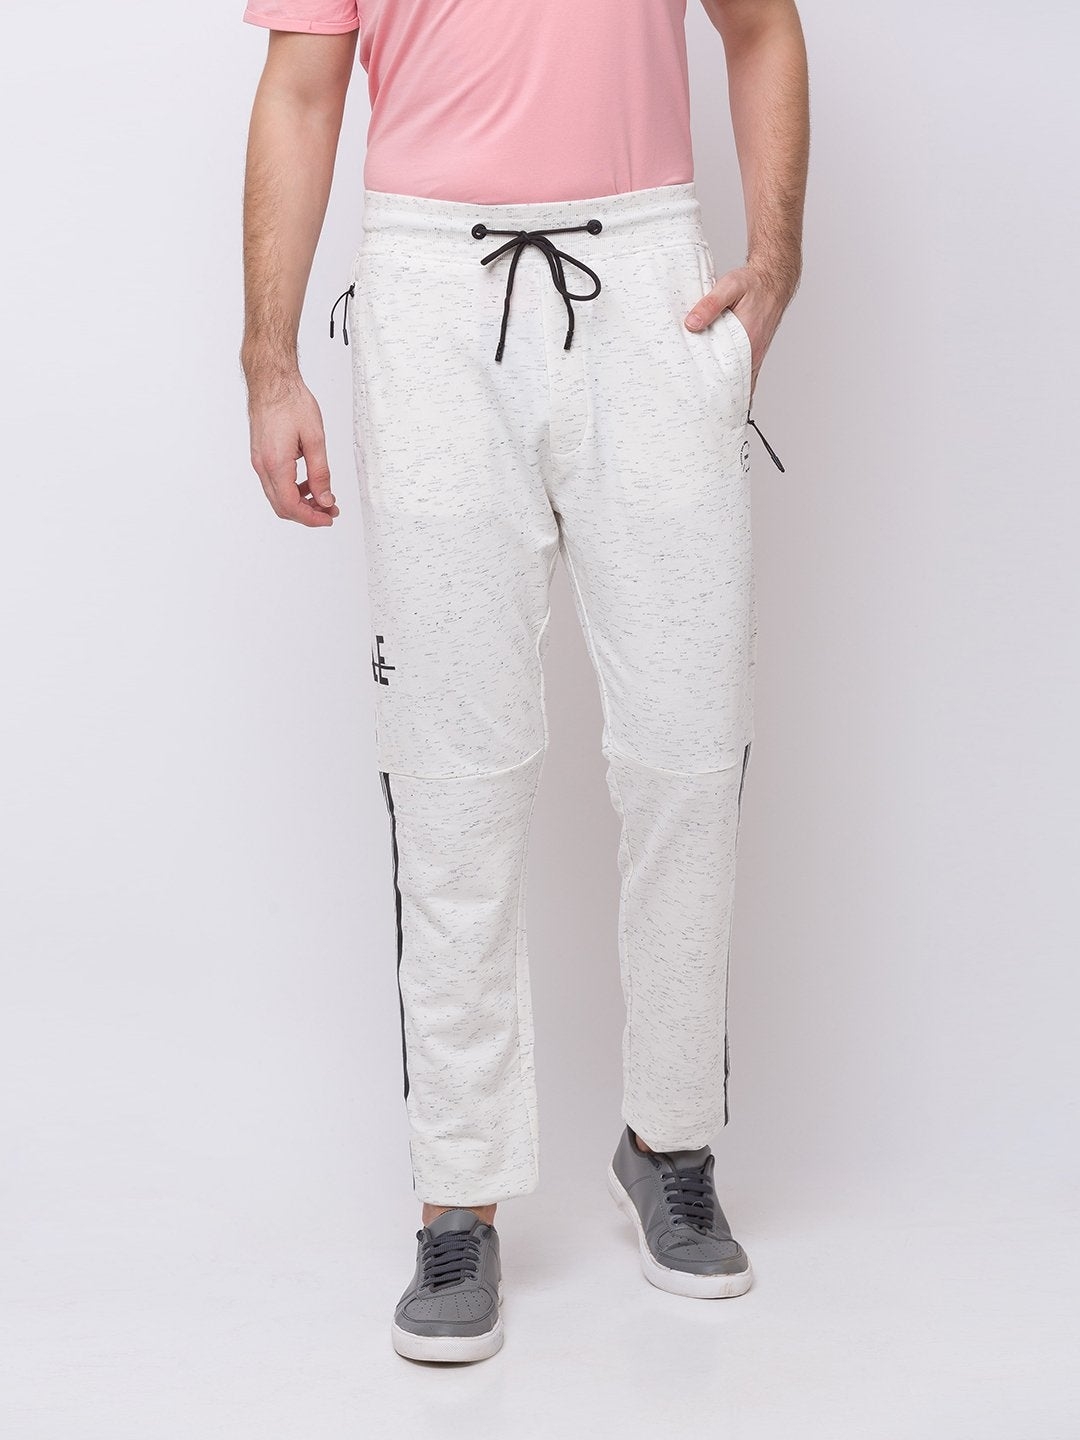 Men's White Printed Trackpants